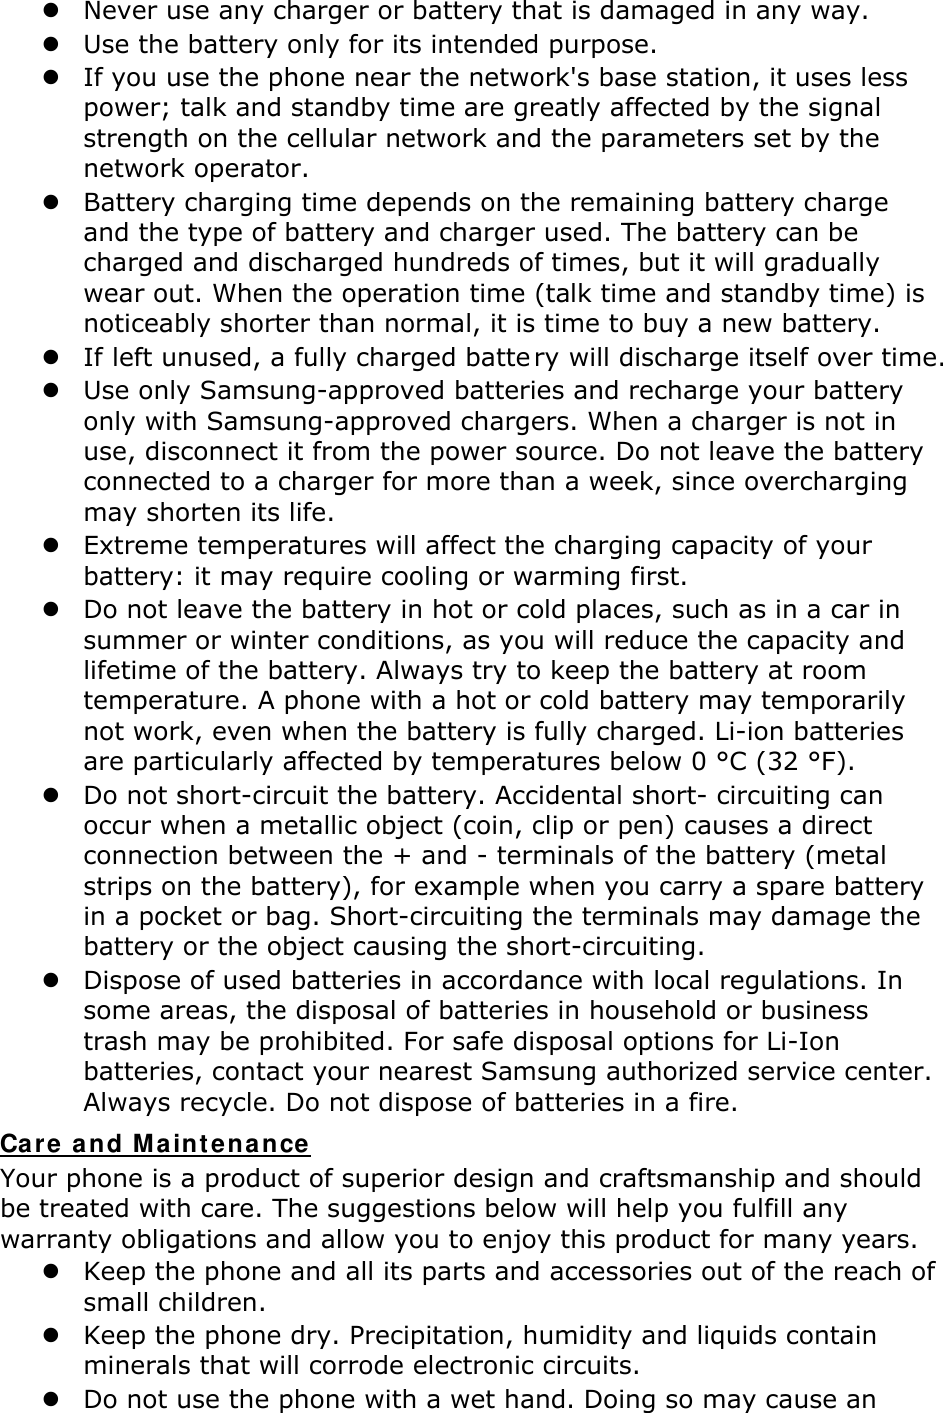 z Never use any charger or battery that is damaged in any way. z Use the battery only for its intended purpose. z If you use the phone near the network&apos;s base station, it uses less power; talk and standby time are greatly affected by the signal strength on the cellular network and the parameters set by the network operator. z Battery charging time depends on the remaining battery charge and the type of battery and charger used. The battery can be charged and discharged hundreds of times, but it will gradually wear out. When the operation time (talk time and standby time) is noticeably shorter than normal, it is time to buy a new battery. z If left unused, a fully charged batte ry will discharge itself over time. z Use only Samsung-approved batteries and recharge your battery only with Samsung-approved chargers. When a charger is not in use, disconnect it from the power source. Do not leave the battery connected to a charger for more than a week, since overcharging may shorten its life. z Extreme temperatures will affect the charging capacity of your battery: it may require cooling or warming first. z Do not leave the battery in hot or cold places, such as in a car in summer or winter conditions, as you will reduce the capacity and lifetime of the battery. Always try to keep the battery at room temperature. A phone with a hot or cold battery may temporarily not work, even when the battery is fully charged. Li-ion batteries are particularly affected by temperatures below 0 °C (32 °F). z Do not short-circuit the battery. Accidental short- circuiting can occur when a metallic object (coin, clip or pen) causes a direct connection between the + and - terminals of the battery (metal strips on the battery), for example when you carry a spare battery in a pocket or bag. Short-circuiting the terminals may damage the battery or the object causing the short-circuiting. z Dispose of used batteries in accordance with local regulations. In some areas, the disposal of batteries in household or business trash may be prohibited. For safe disposal options for Li-Ion batteries, contact your nearest Samsung authorized service center. Always recycle. Do not dispose of batteries in a fire. Care and Maintenance Your phone is a product of superior design and craftsmanship and should be treated with care. The suggestions below will help you fulfill any warranty obligations and allow you to enjoy this product for many years. z Keep the phone and all its parts and accessories out of the reach of small children. z Keep the phone dry. Precipitation, humidity and liquids contain minerals that will corrode electronic circuits. z Do not use the phone with a wet hand. Doing so may cause an 